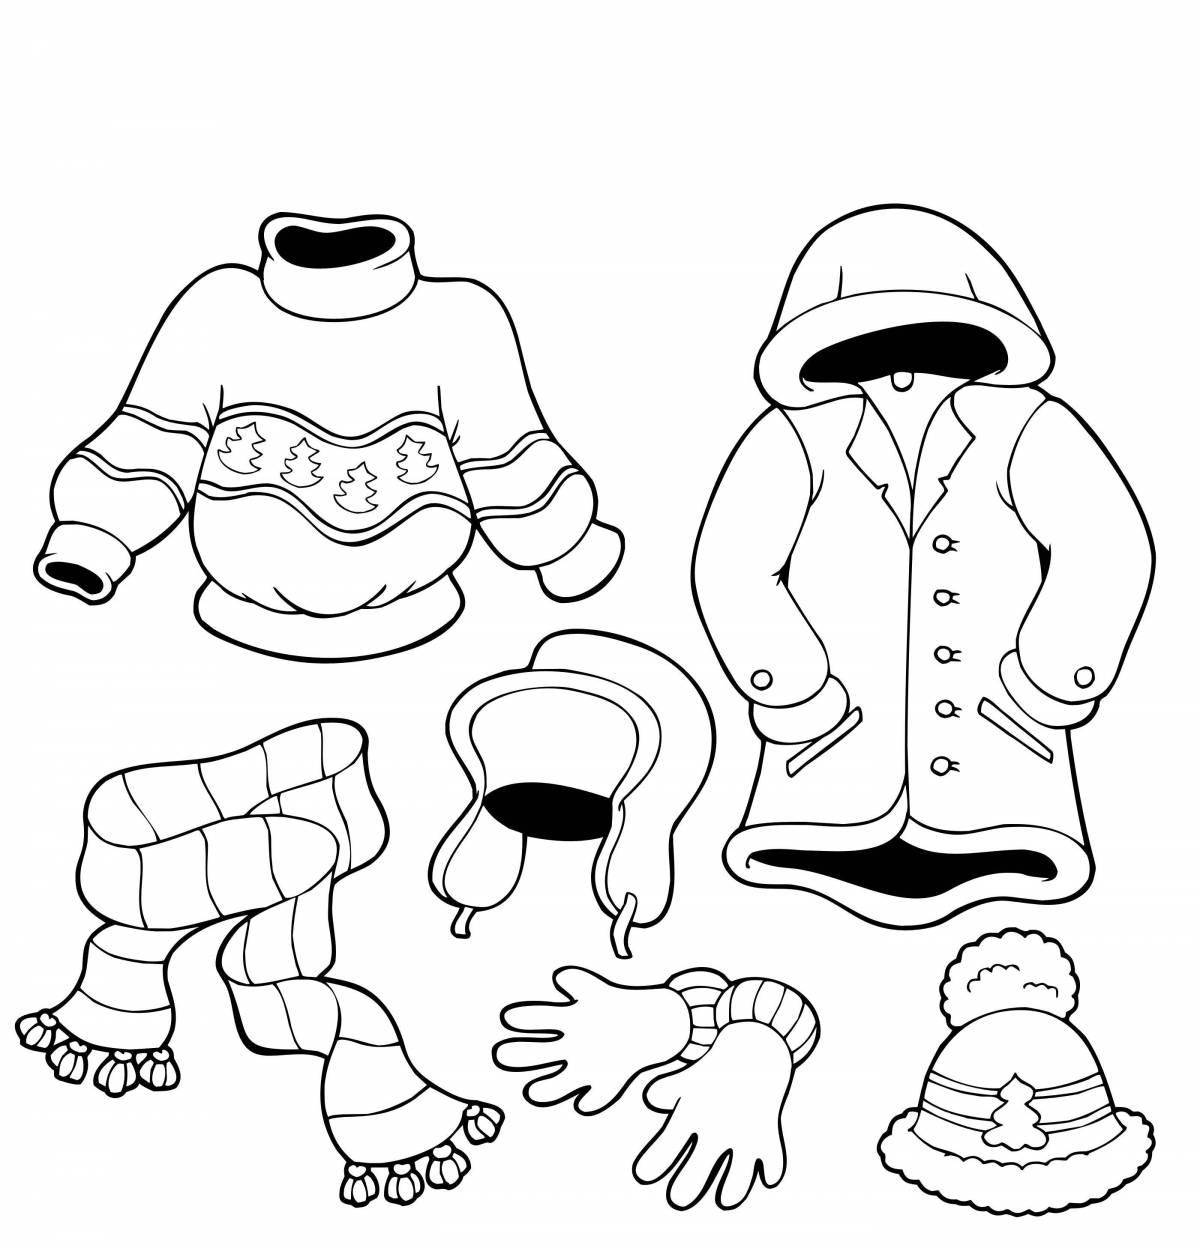 Amazing outerwear coloring page